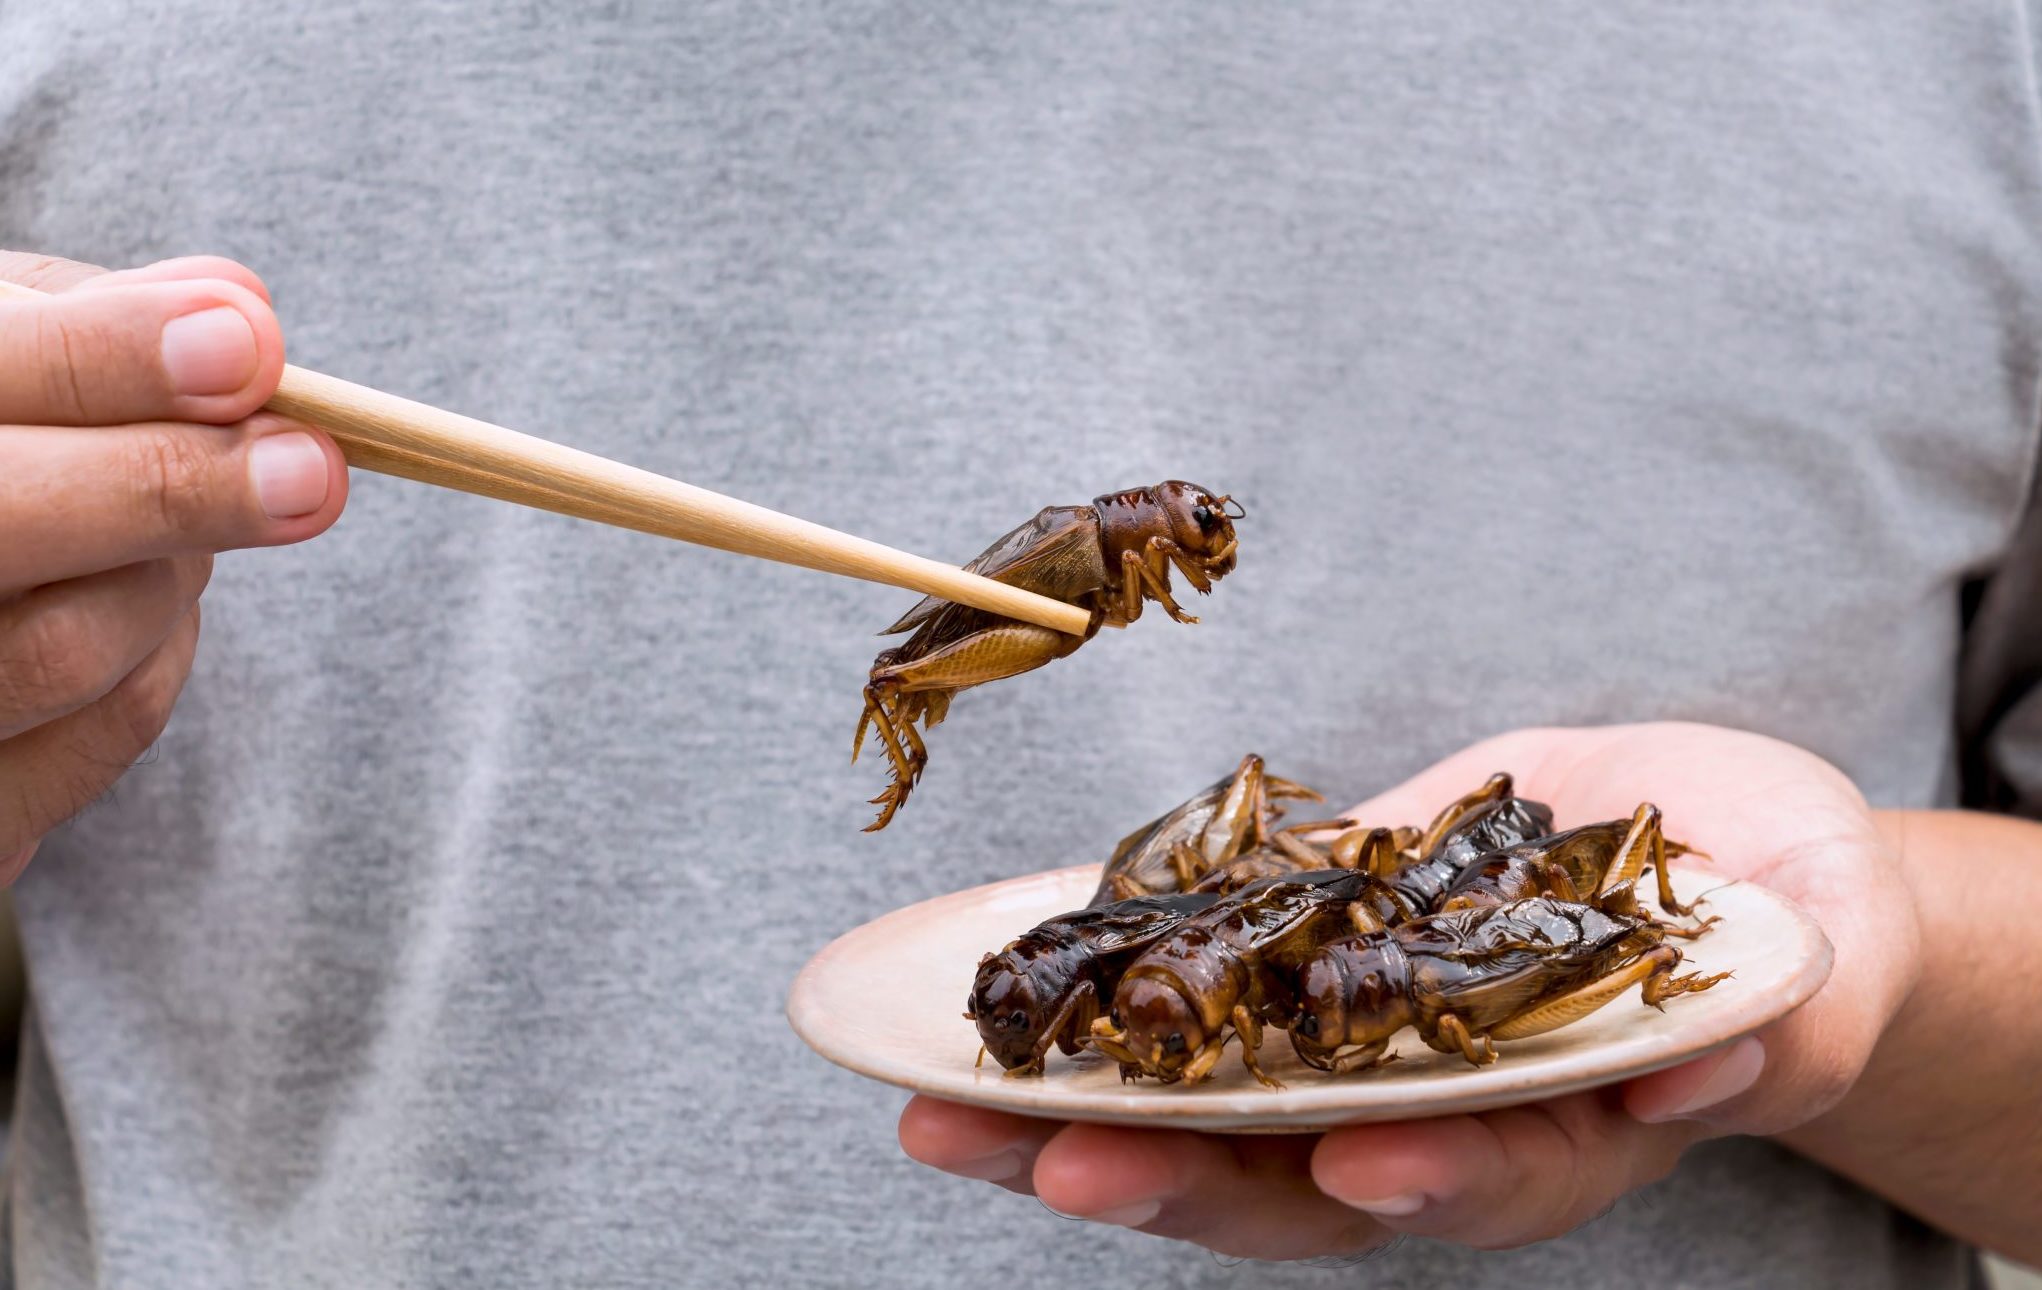 Man's,Hand,Holding,Chopsticks,Eating,Crickets,Insect,On,Plate.,Food